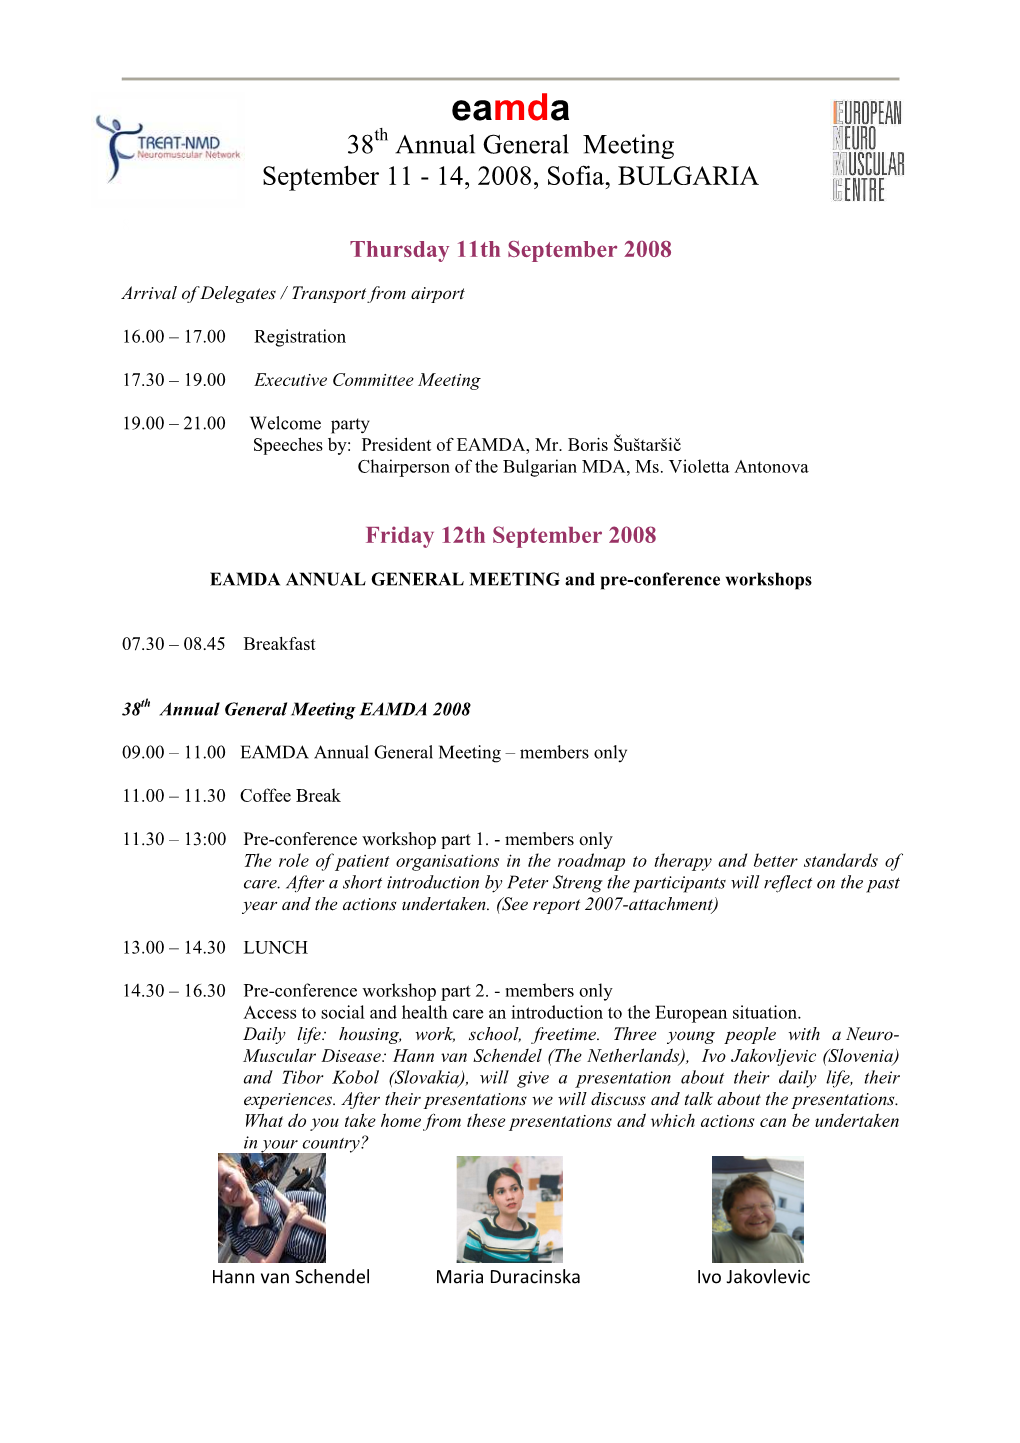 AGM Conferenceprogramme 2008